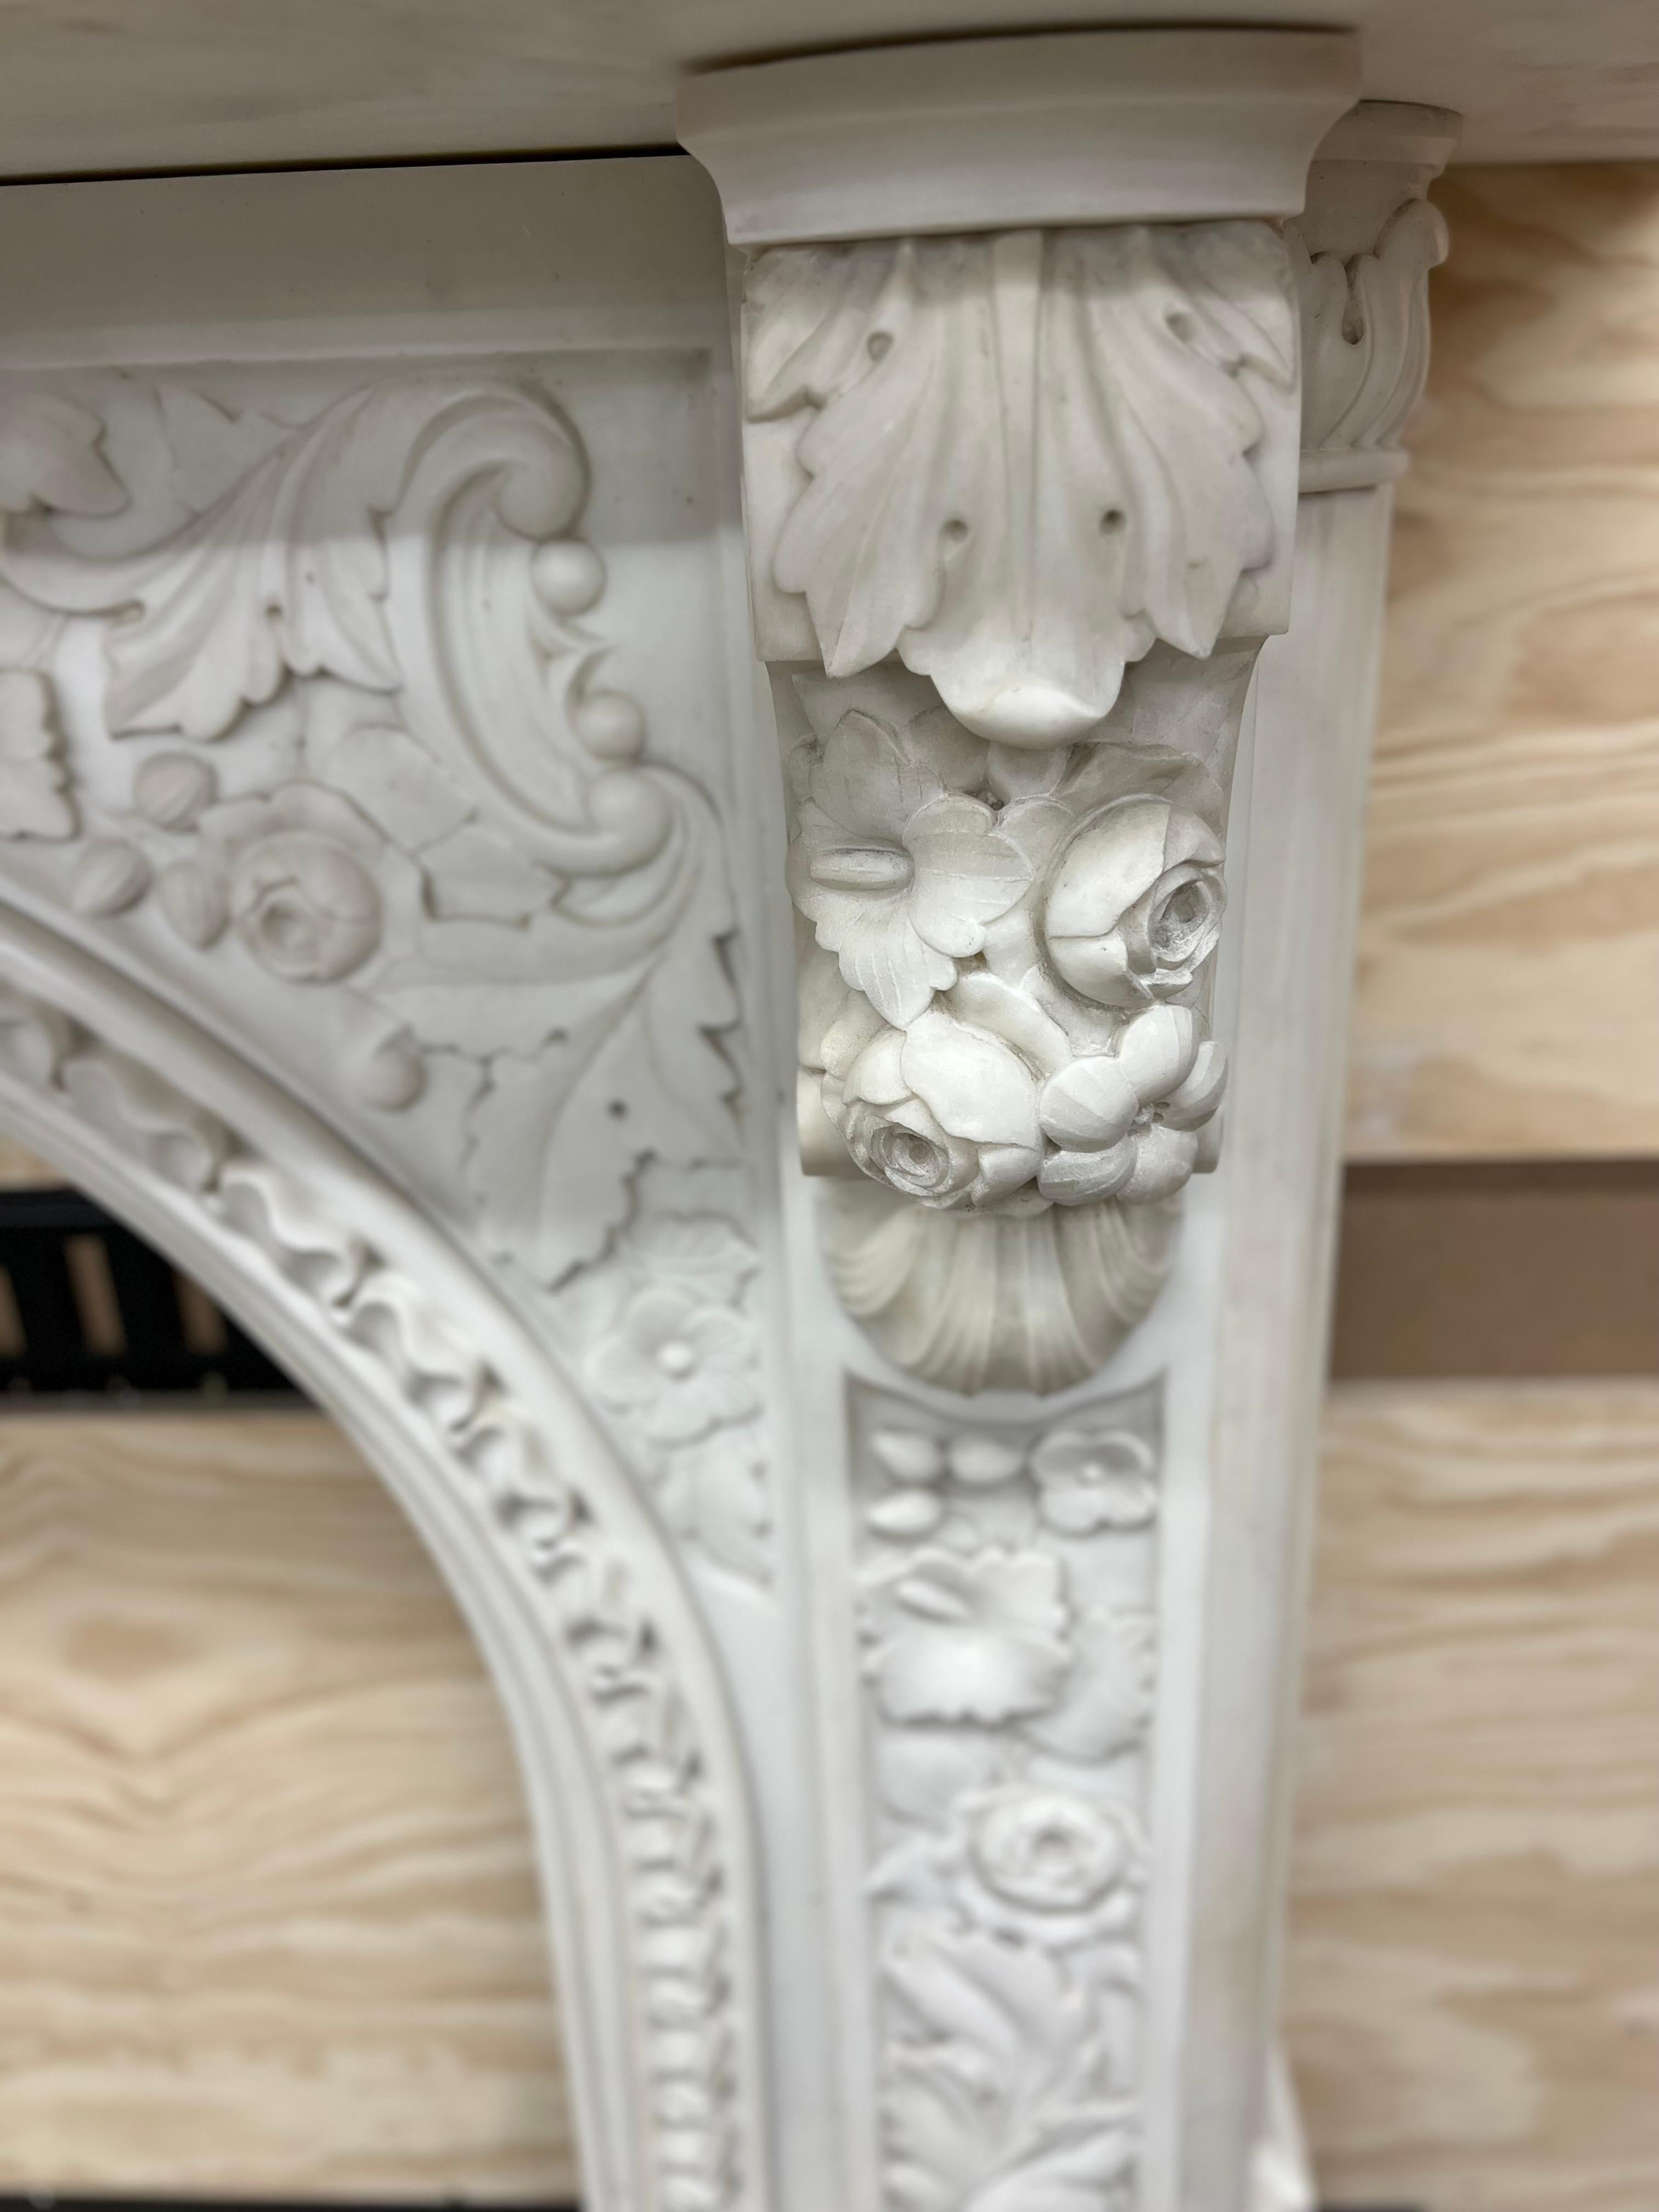 Arched Victorian chimneypiece c.1860 carved in Statuary marble with a firebox opening designed to accommodate a register grate, having profuse foliate carving to the jamb and frieze panels, repeated in the corbels supporting the mantel shelf and the